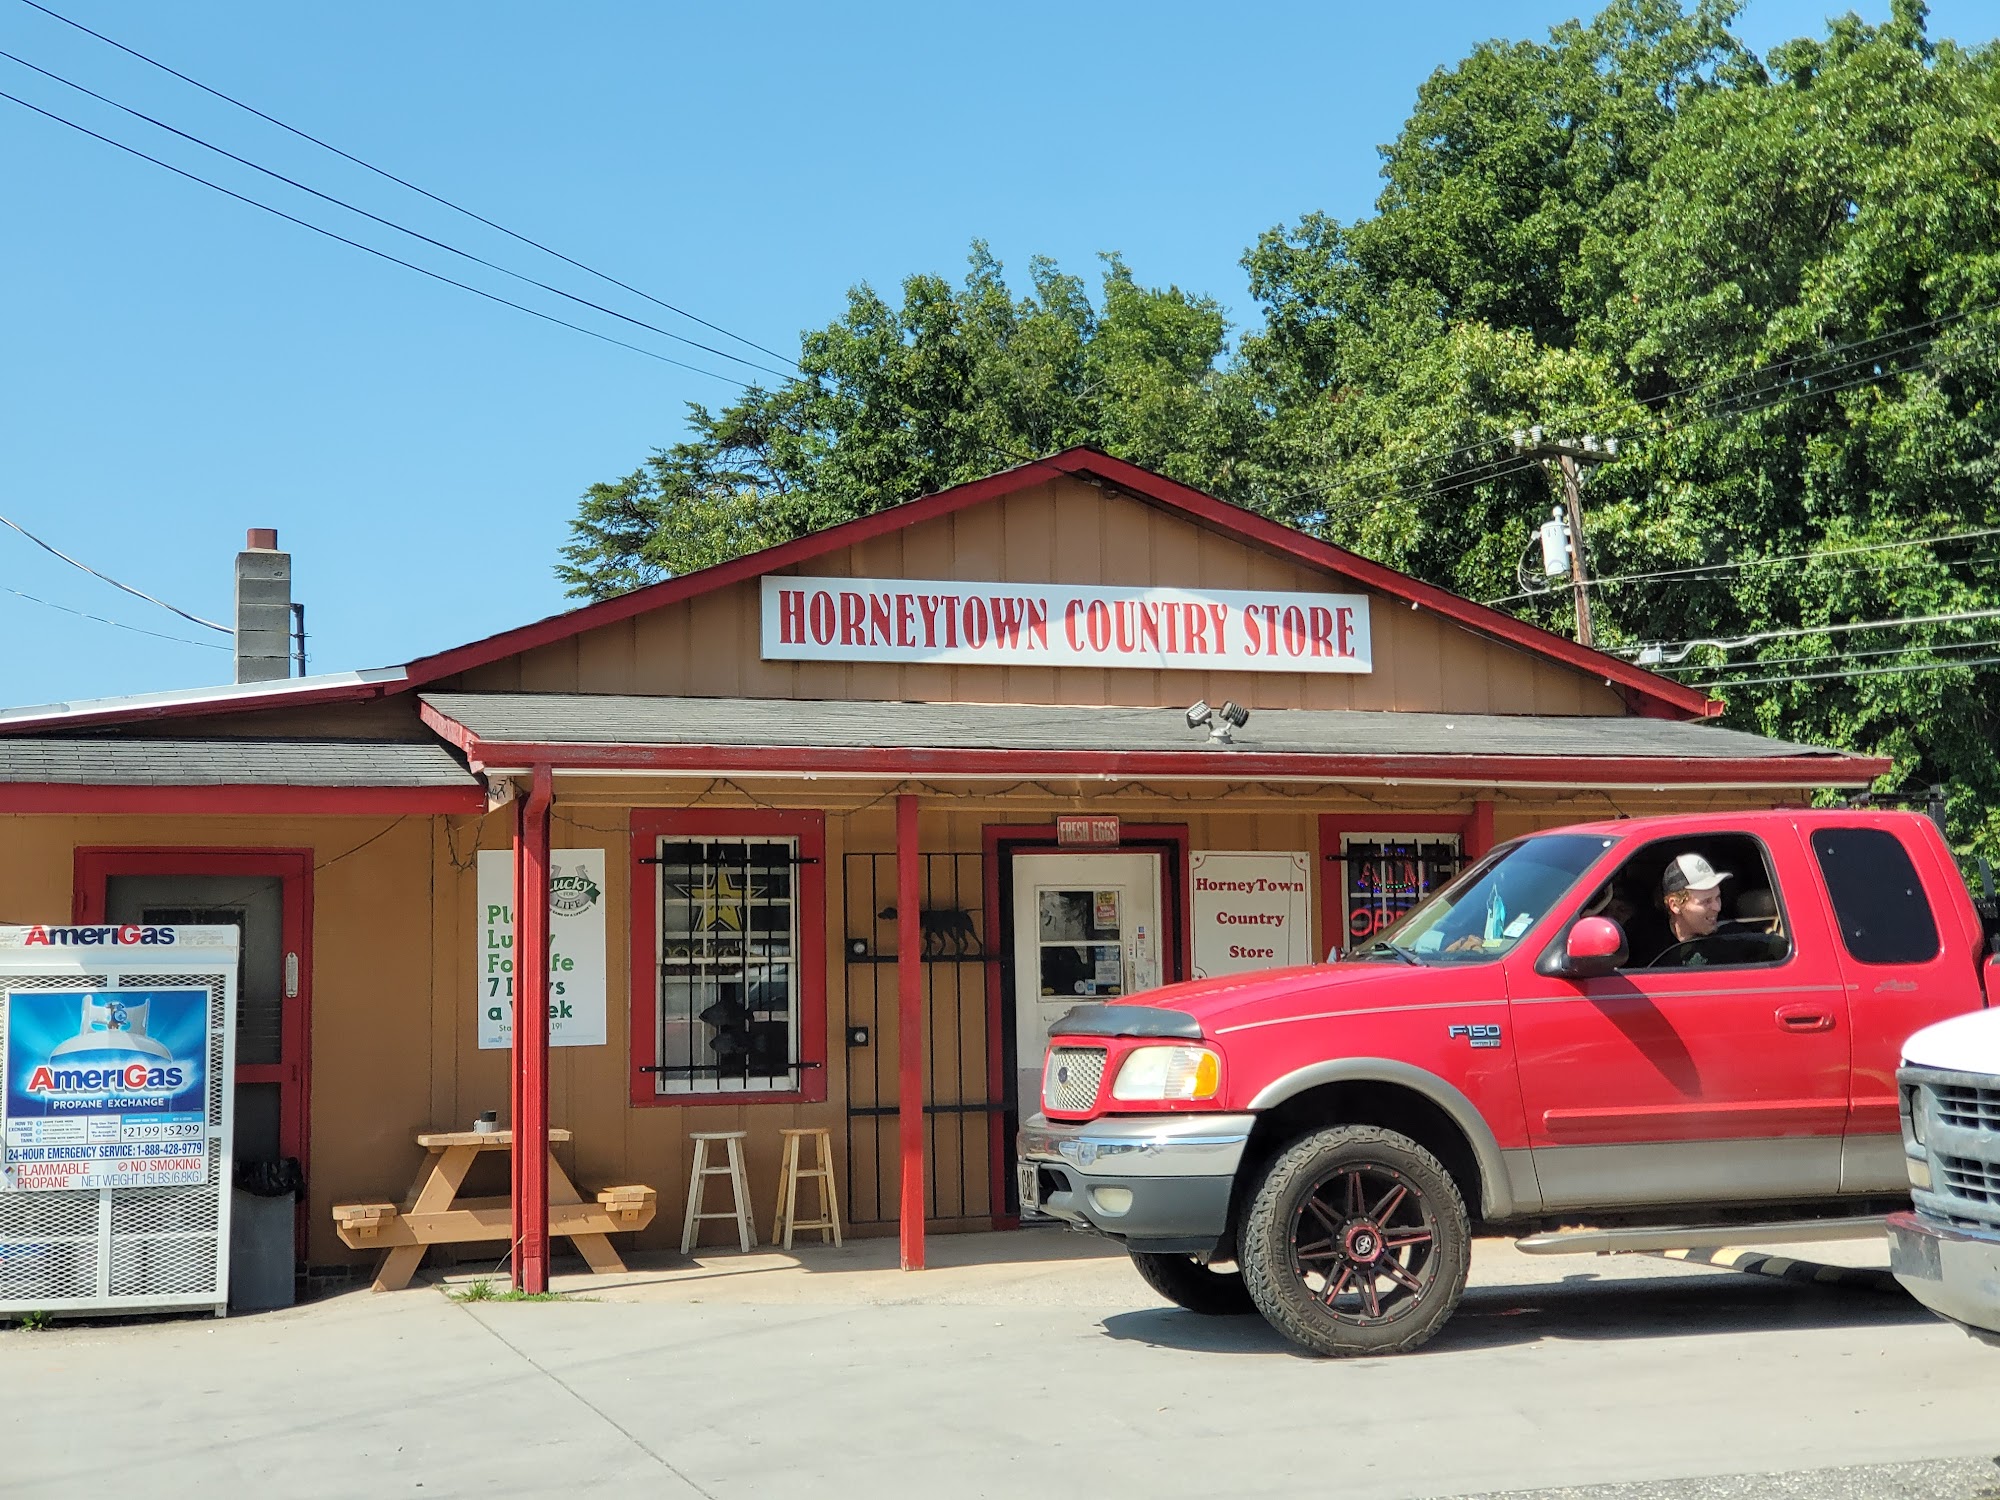 HORNEYTOWN COUNTRY STORE